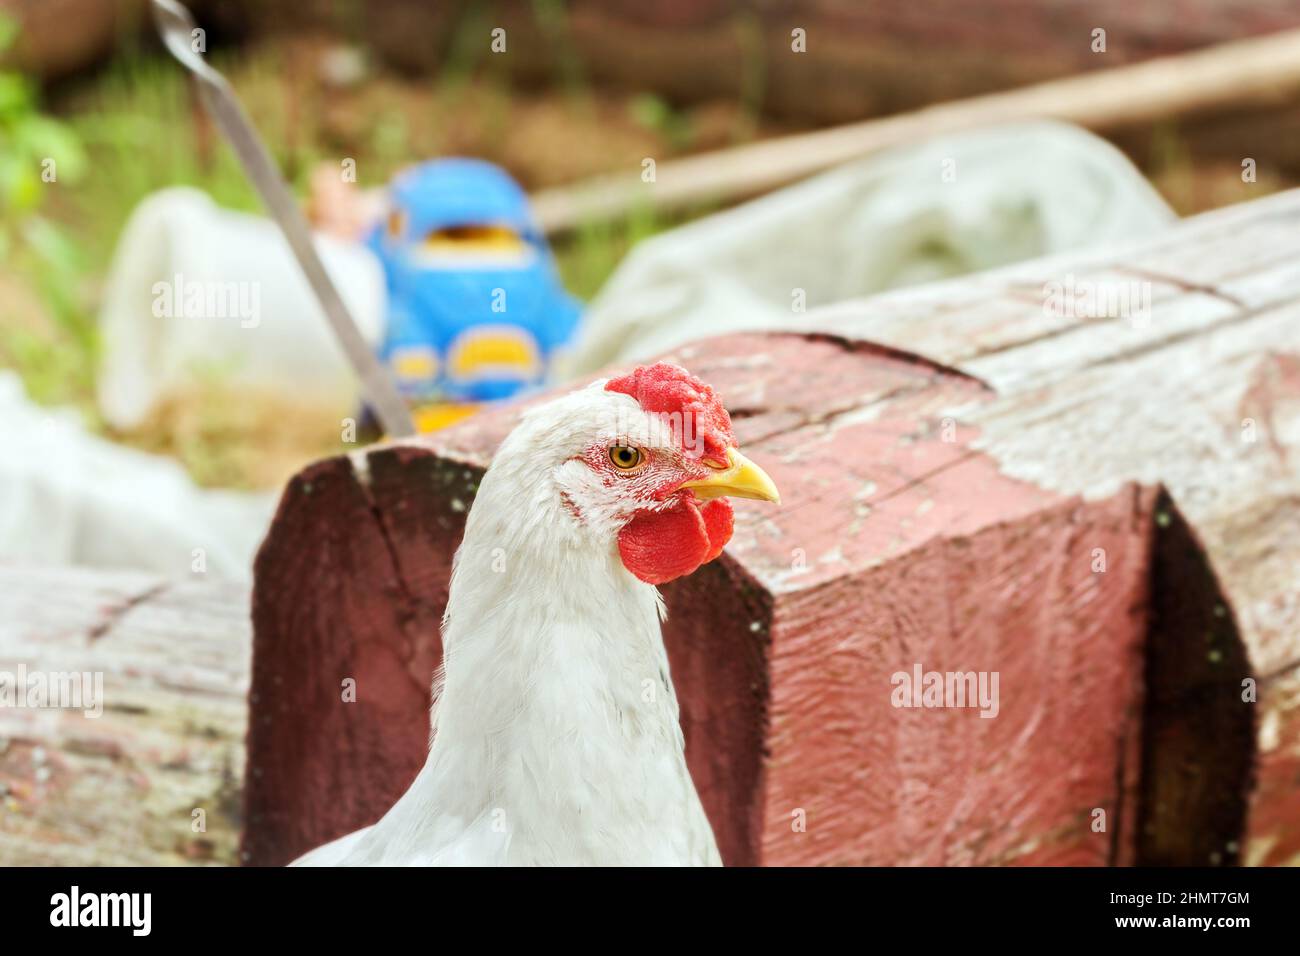 Real white chicken with red scallop in backyard at day Stock Photo